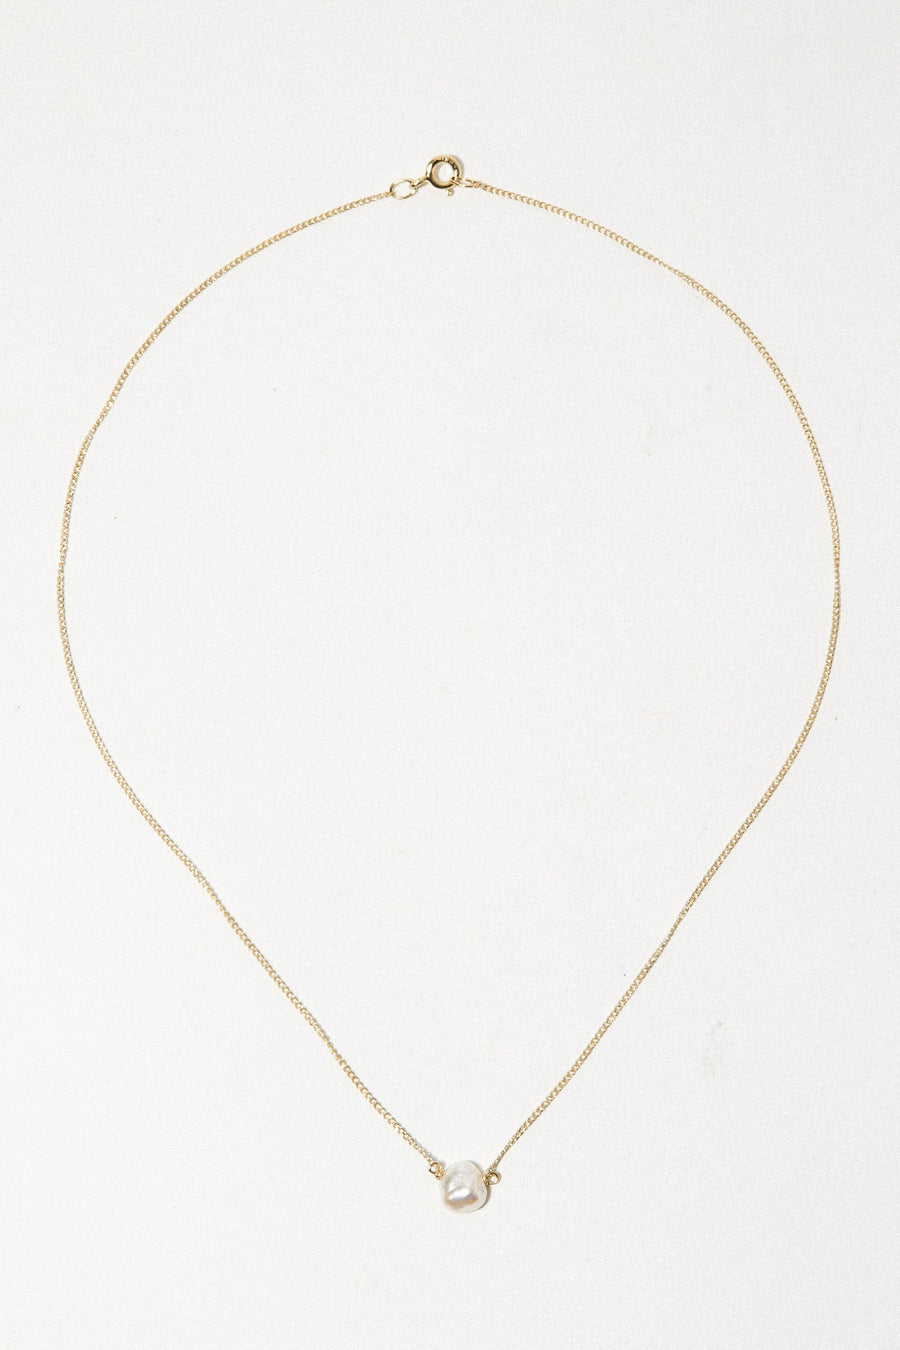 CGM Jewelry Gold / 16 Inches Pearl Drop Necklace